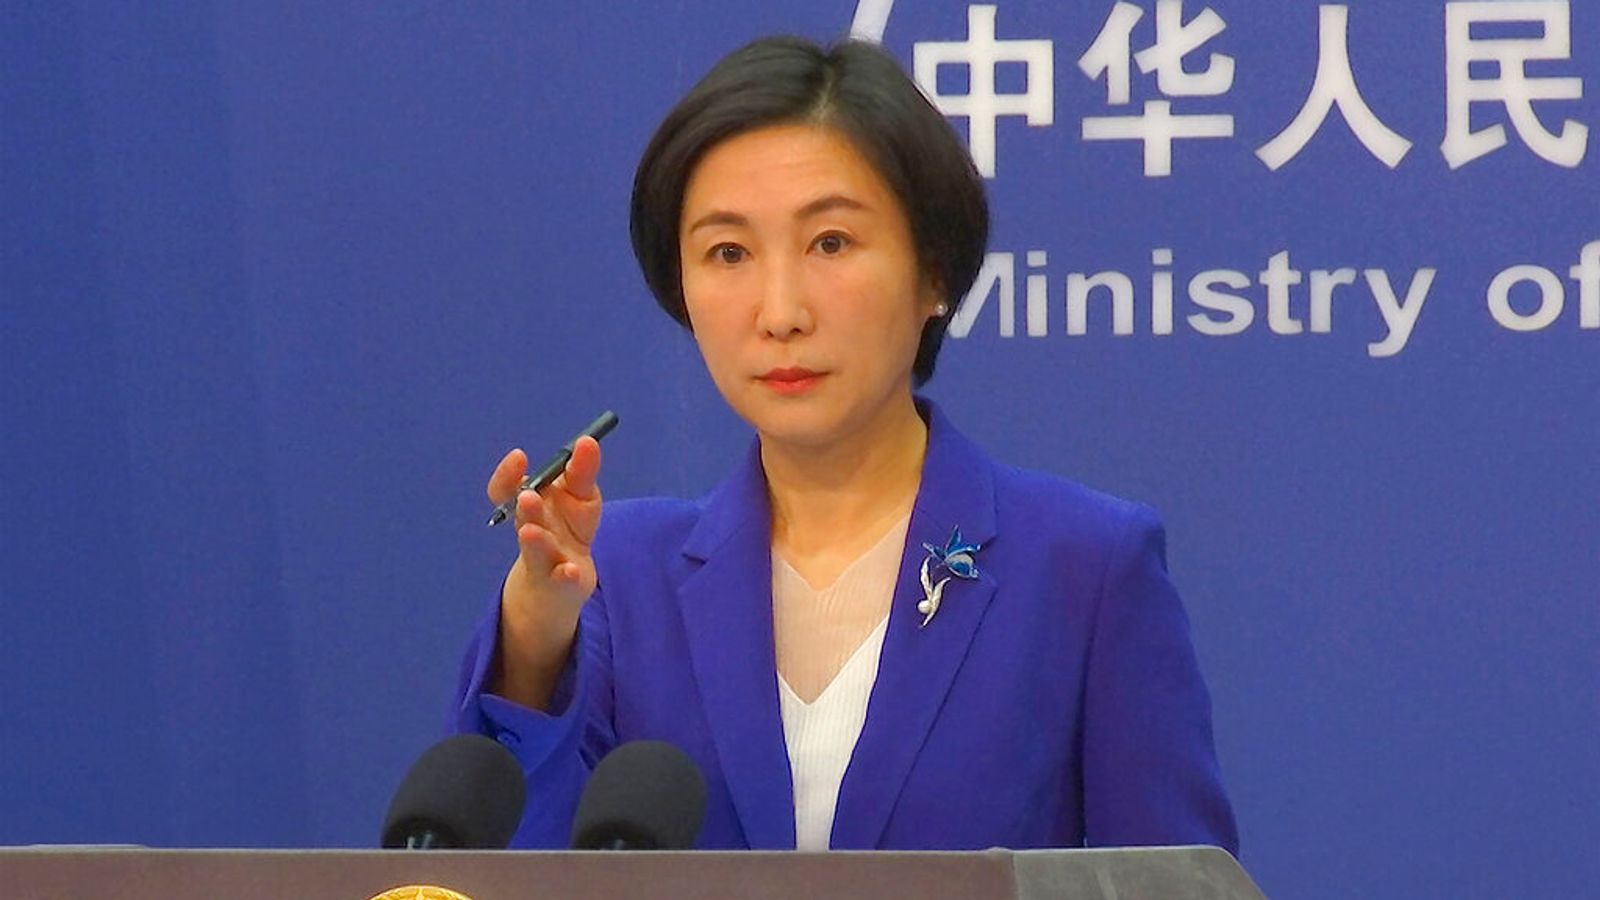 China accuses US of 'abusing state power' following TikTok bans on government devices